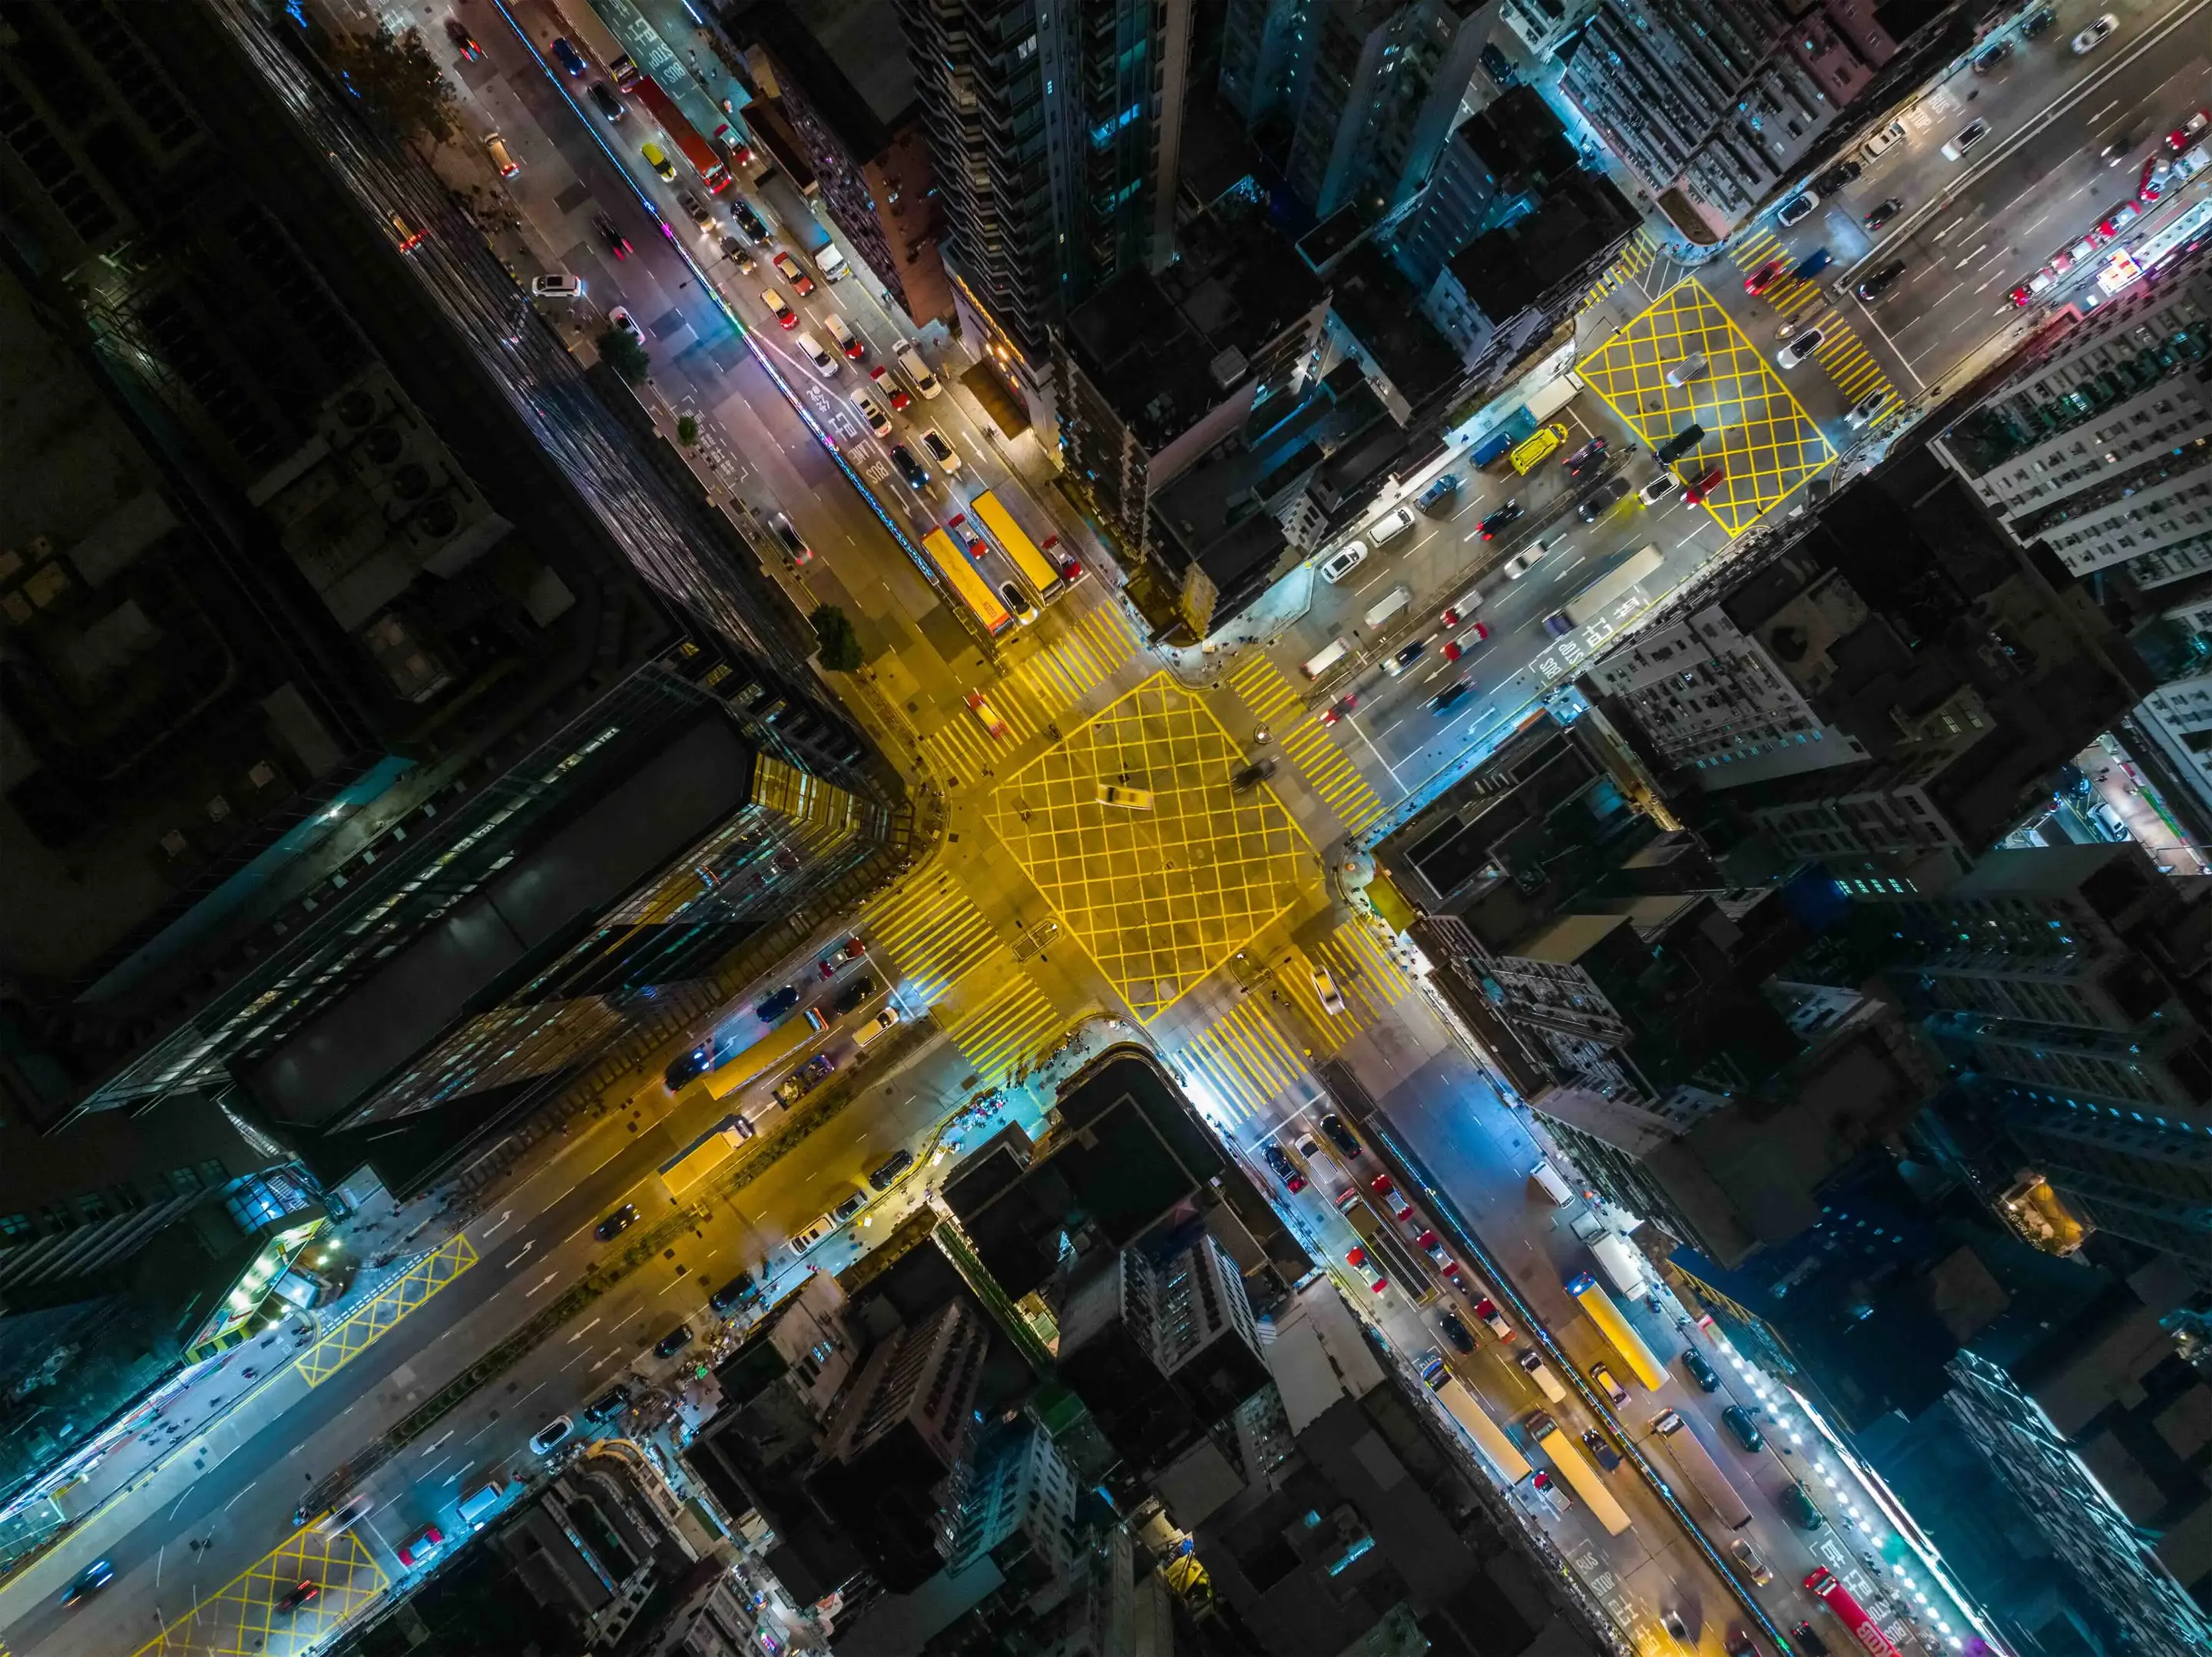 An overhead shot down onto a busy city intersection at night